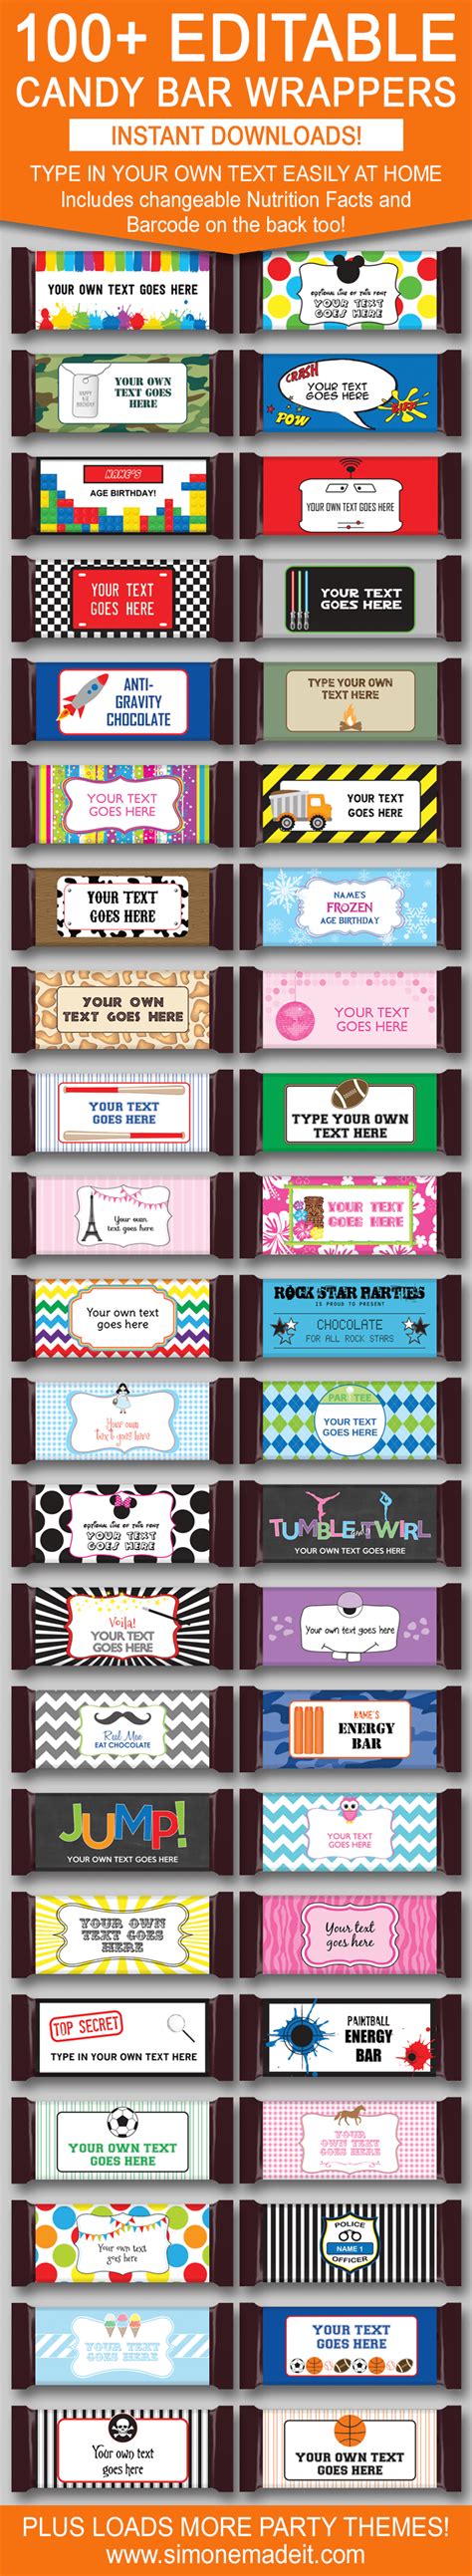 diy candy bar wrapper templates personalized candy bars